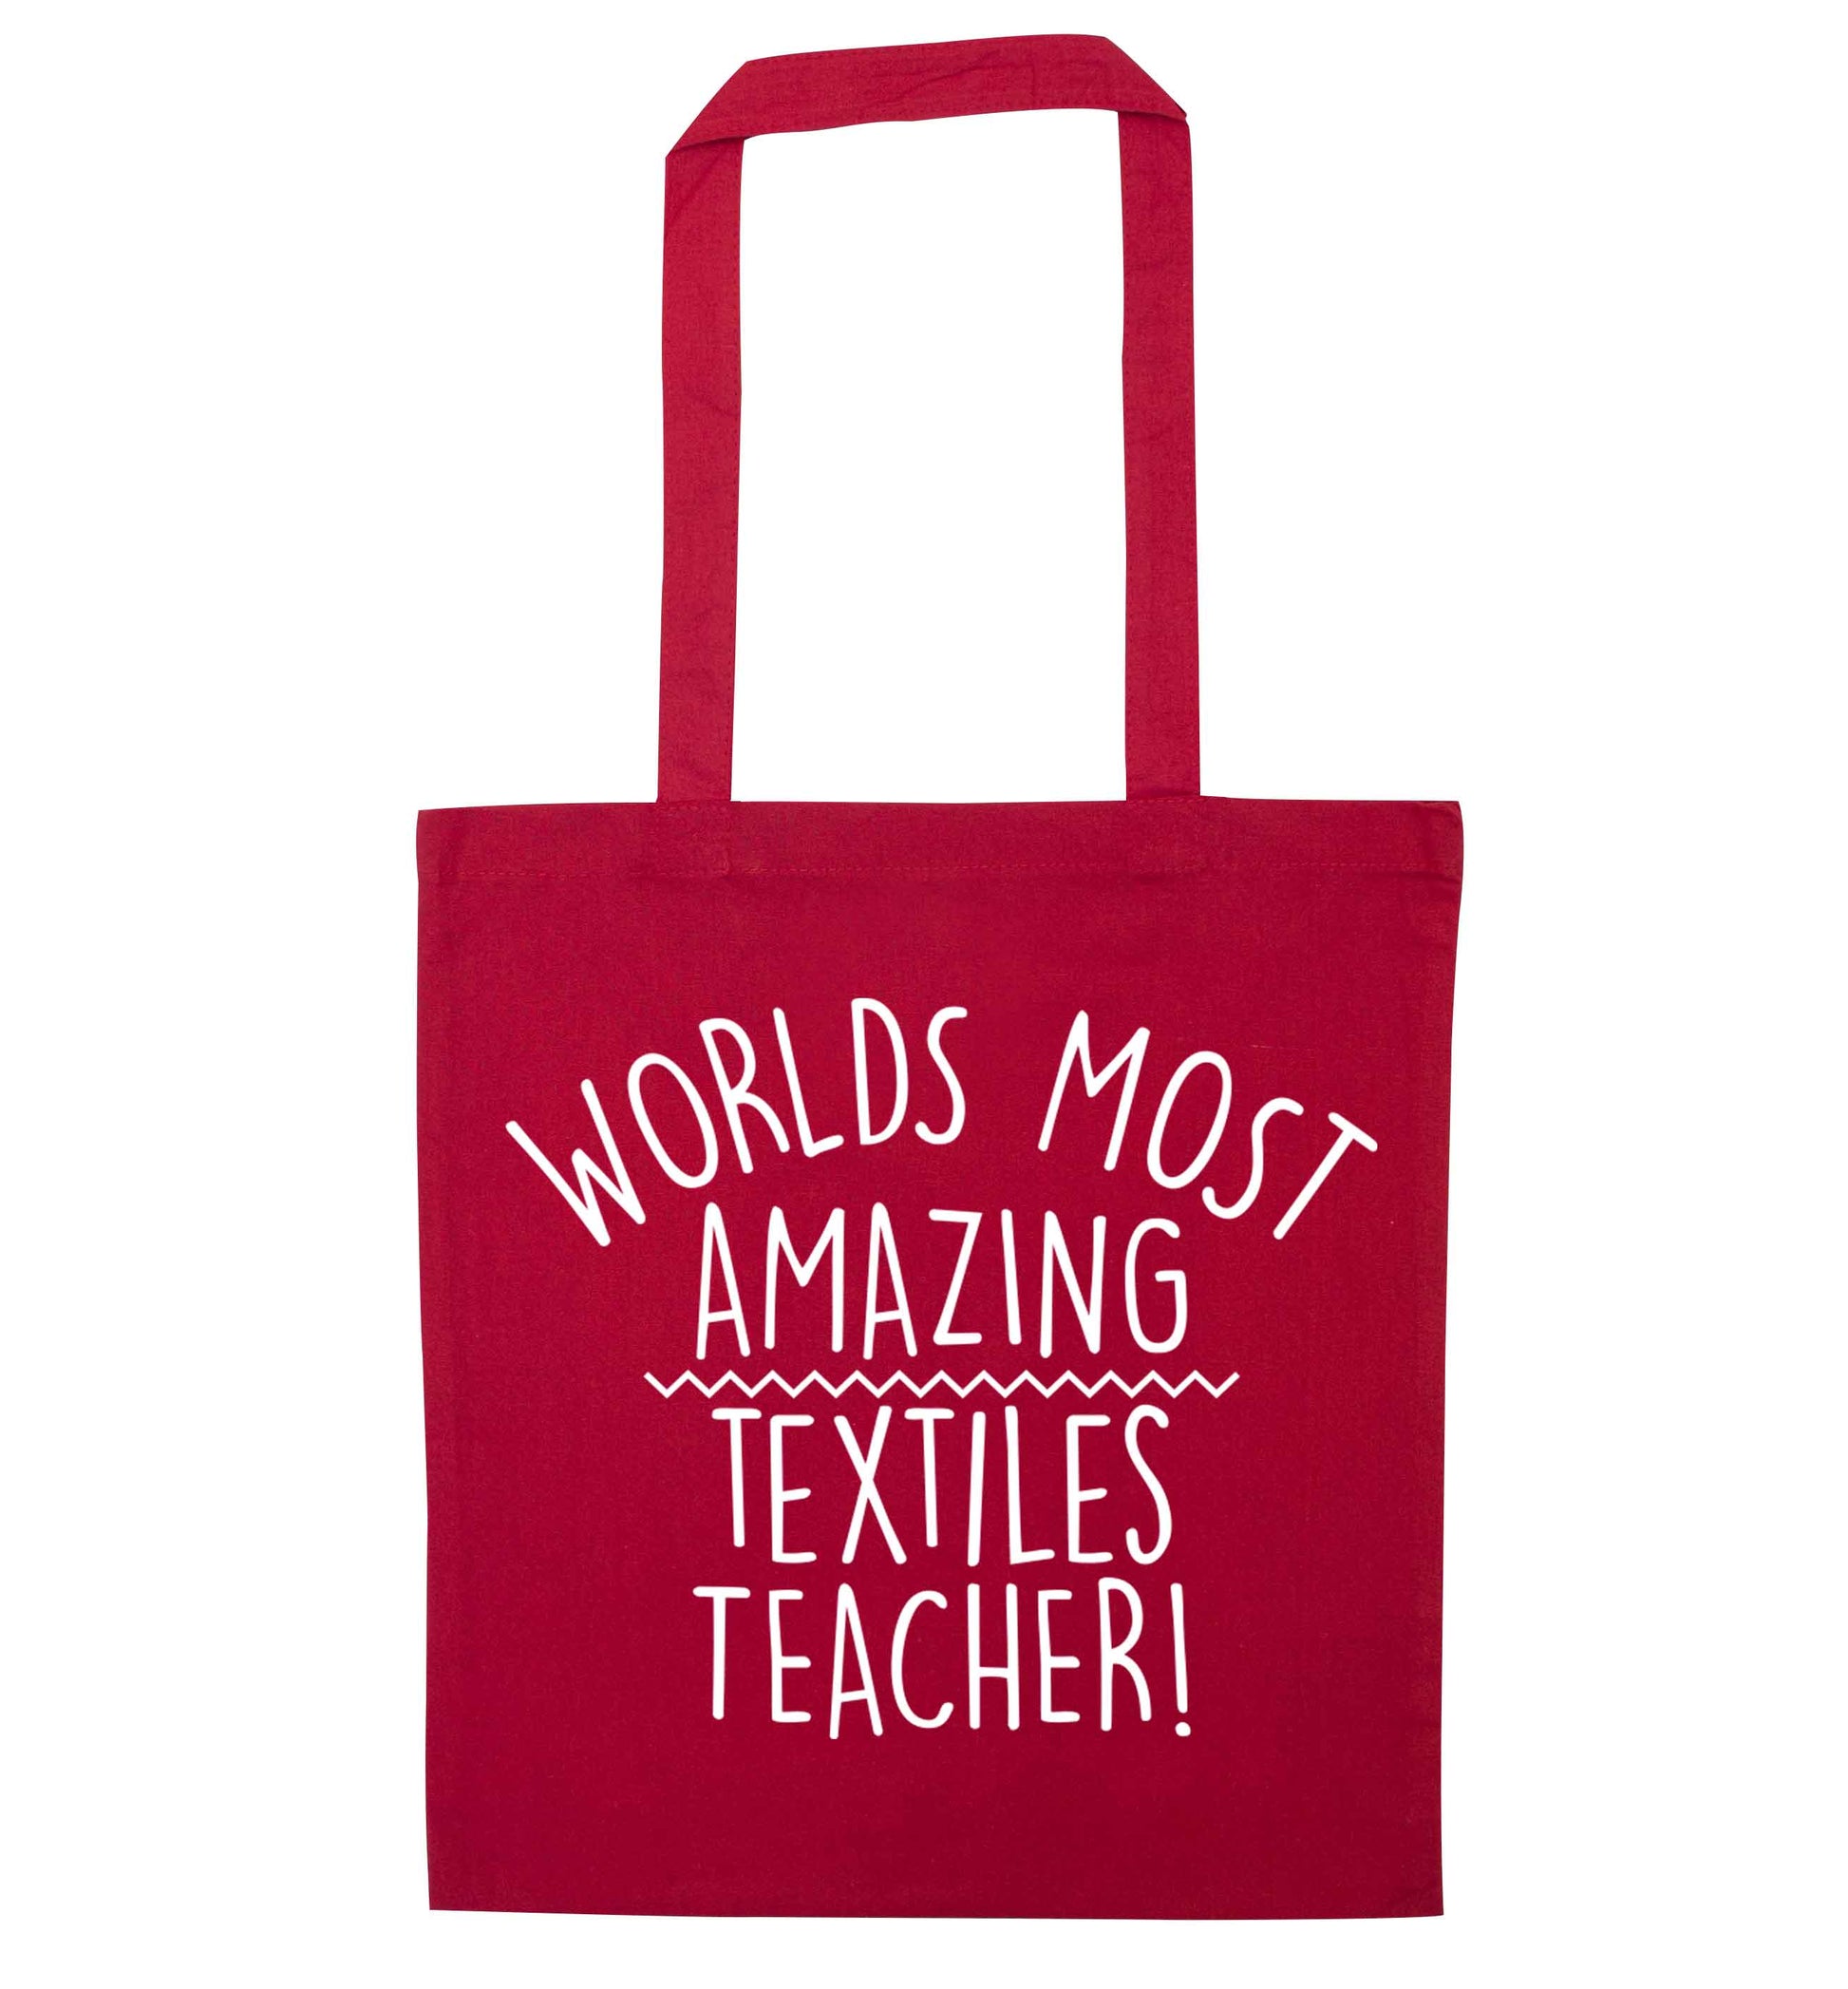 Worlds most amazing textiles teacher red tote bag